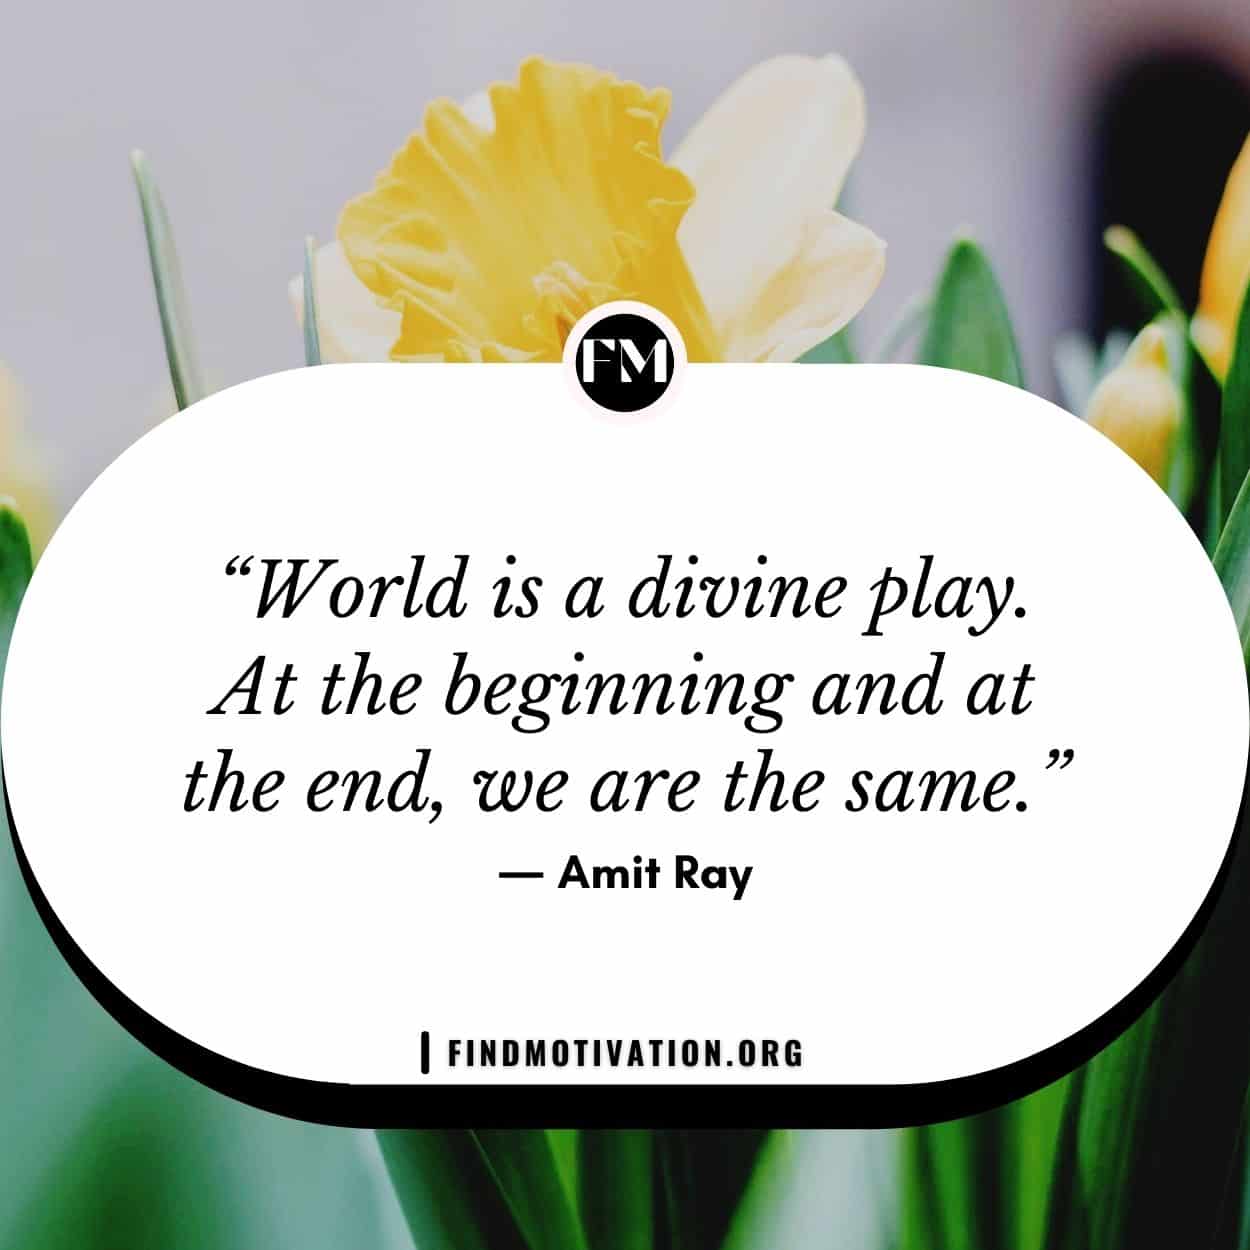 Divine Love Quotes to find your true love